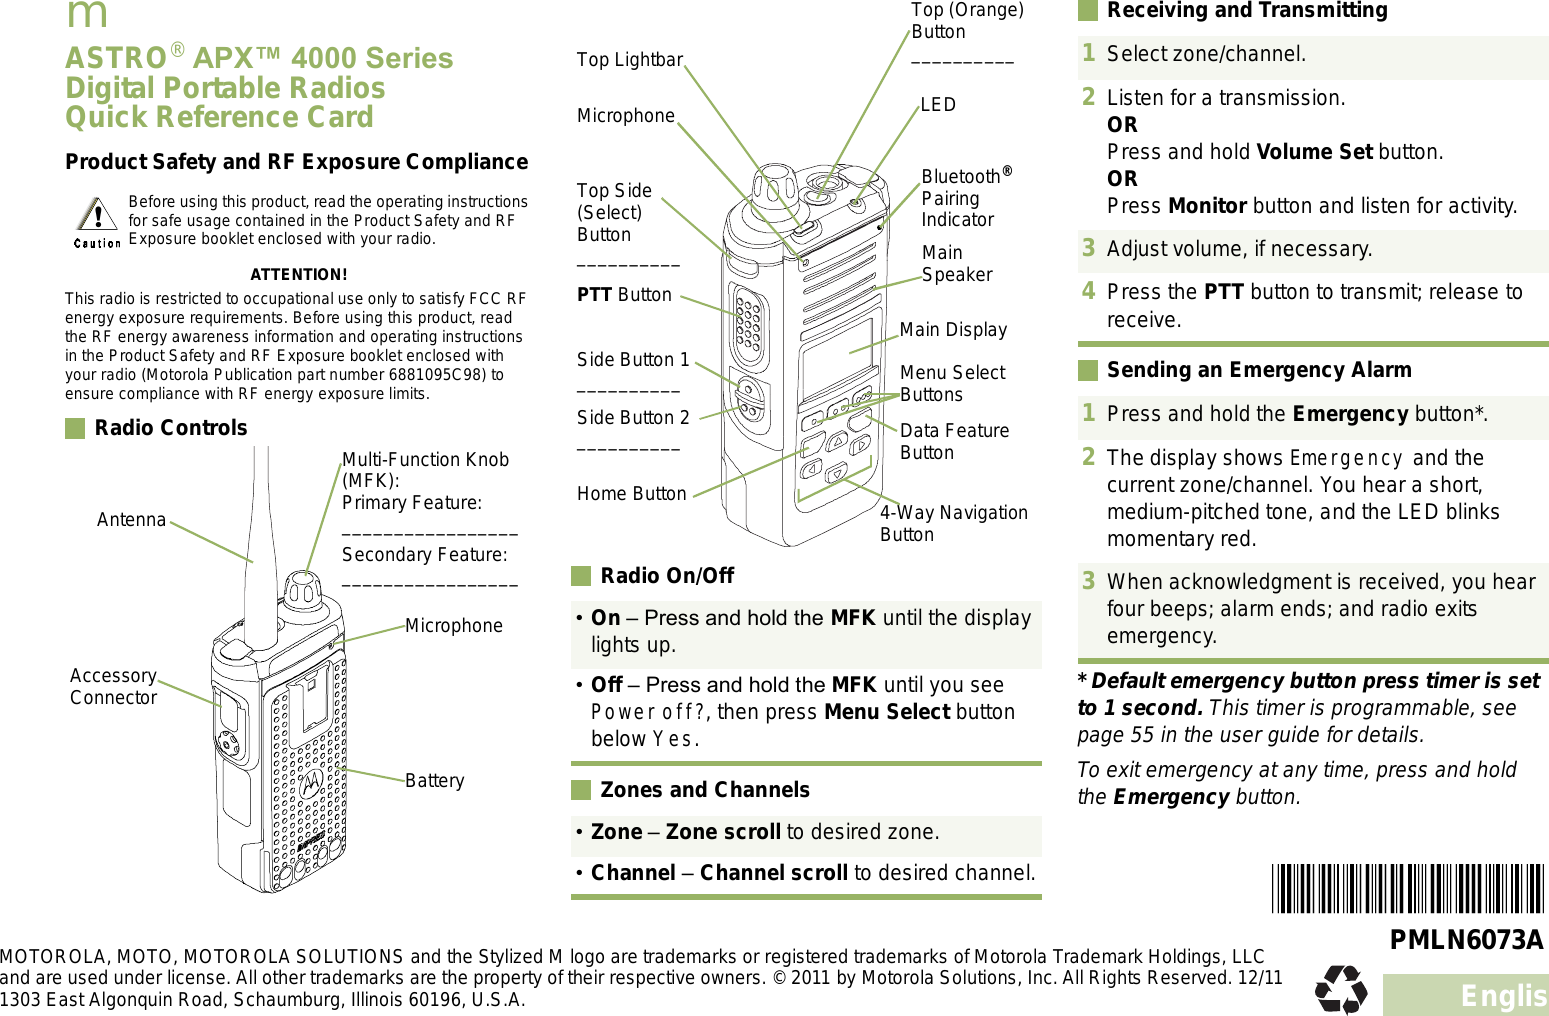 EnglishmASTRO® APX 4000 Series Digital Portable RadiosQuick Reference CardProduct Safety and RF Exposure ComplianceATTENTION!This radio is restricted to occupational use only to satisfy FCC RF energy exposure requirements. Before using this product, read the RF energy awareness information and operating instructions in the Product Safety and RF Exposure booklet enclosed with your radio (Motorola Publication part number 6881095C98) to ensure compliance with RF energy exposure limits. Radio Controls    Radio On/Off Zones and ChannelsReceiving and TransmittingSending an Emergency Alarm* Default emergency button press timer is set to 1 second. This timer is programmable, see page 55 in the user guide for details.To exit emergency at any time, press and hold the Emergency button.Before using this product, read the operating instructions for safe usage contained in the Product Safety and RF Exposure booklet enclosed with your radio.AntennaAccessory ConnectorMulti-Function Knob (MFK):Primary Feature:_________________Secondary Feature:_________________BatteryMicrophone On  Press and hold the MFK until the display lights up.Off  Press and hold the MFK until you see Power off?, then press Menu Select button below Yes.Zone  Zone scroll to desired zone.Channel  Channel scroll to desired channel.Top Lightbar Side Button 1__________PTT ButtonTop Side (Select) Button__________Bluetooth® Pairing IndicatorMain SpeakerMicrophoneSide Button 2__________Home ButtonLEDMenu Select ButtonsData Feature Button4-Way Navigation ButtonMain DisplayTop (Orange) Button__________ 1Select zone/channel.2Listen for a transmission.ORPress and hold Volume Set button.ORPress Monitor button and listen for activity.3Adjust volume, if necessary.4Press the PTT button to transmit; release to receive.1Press and hold the Emergency button*. 2The display shows Emergency and the current zone/channel. You hear a short, medium-pitched tone, and the LED blinks momentary red.3When acknowledgment is received, you hear four beeps; alarm ends; and radio exits emergency.PMLN6073AMOTOROLA, MOTO, MOTOROLA SOLUTIONS and the Stylized M logo are trademarks or registered trademarks of Motorola Trademark Holdings, LLC and are used under license. All other trademarks are the property of their respective owners. © 2011 by Motorola Solutions, Inc. All Rights Reserved. 12/11 1303 East Algonquin Road, Schaumburg, Illinois 60196, U.S.A.